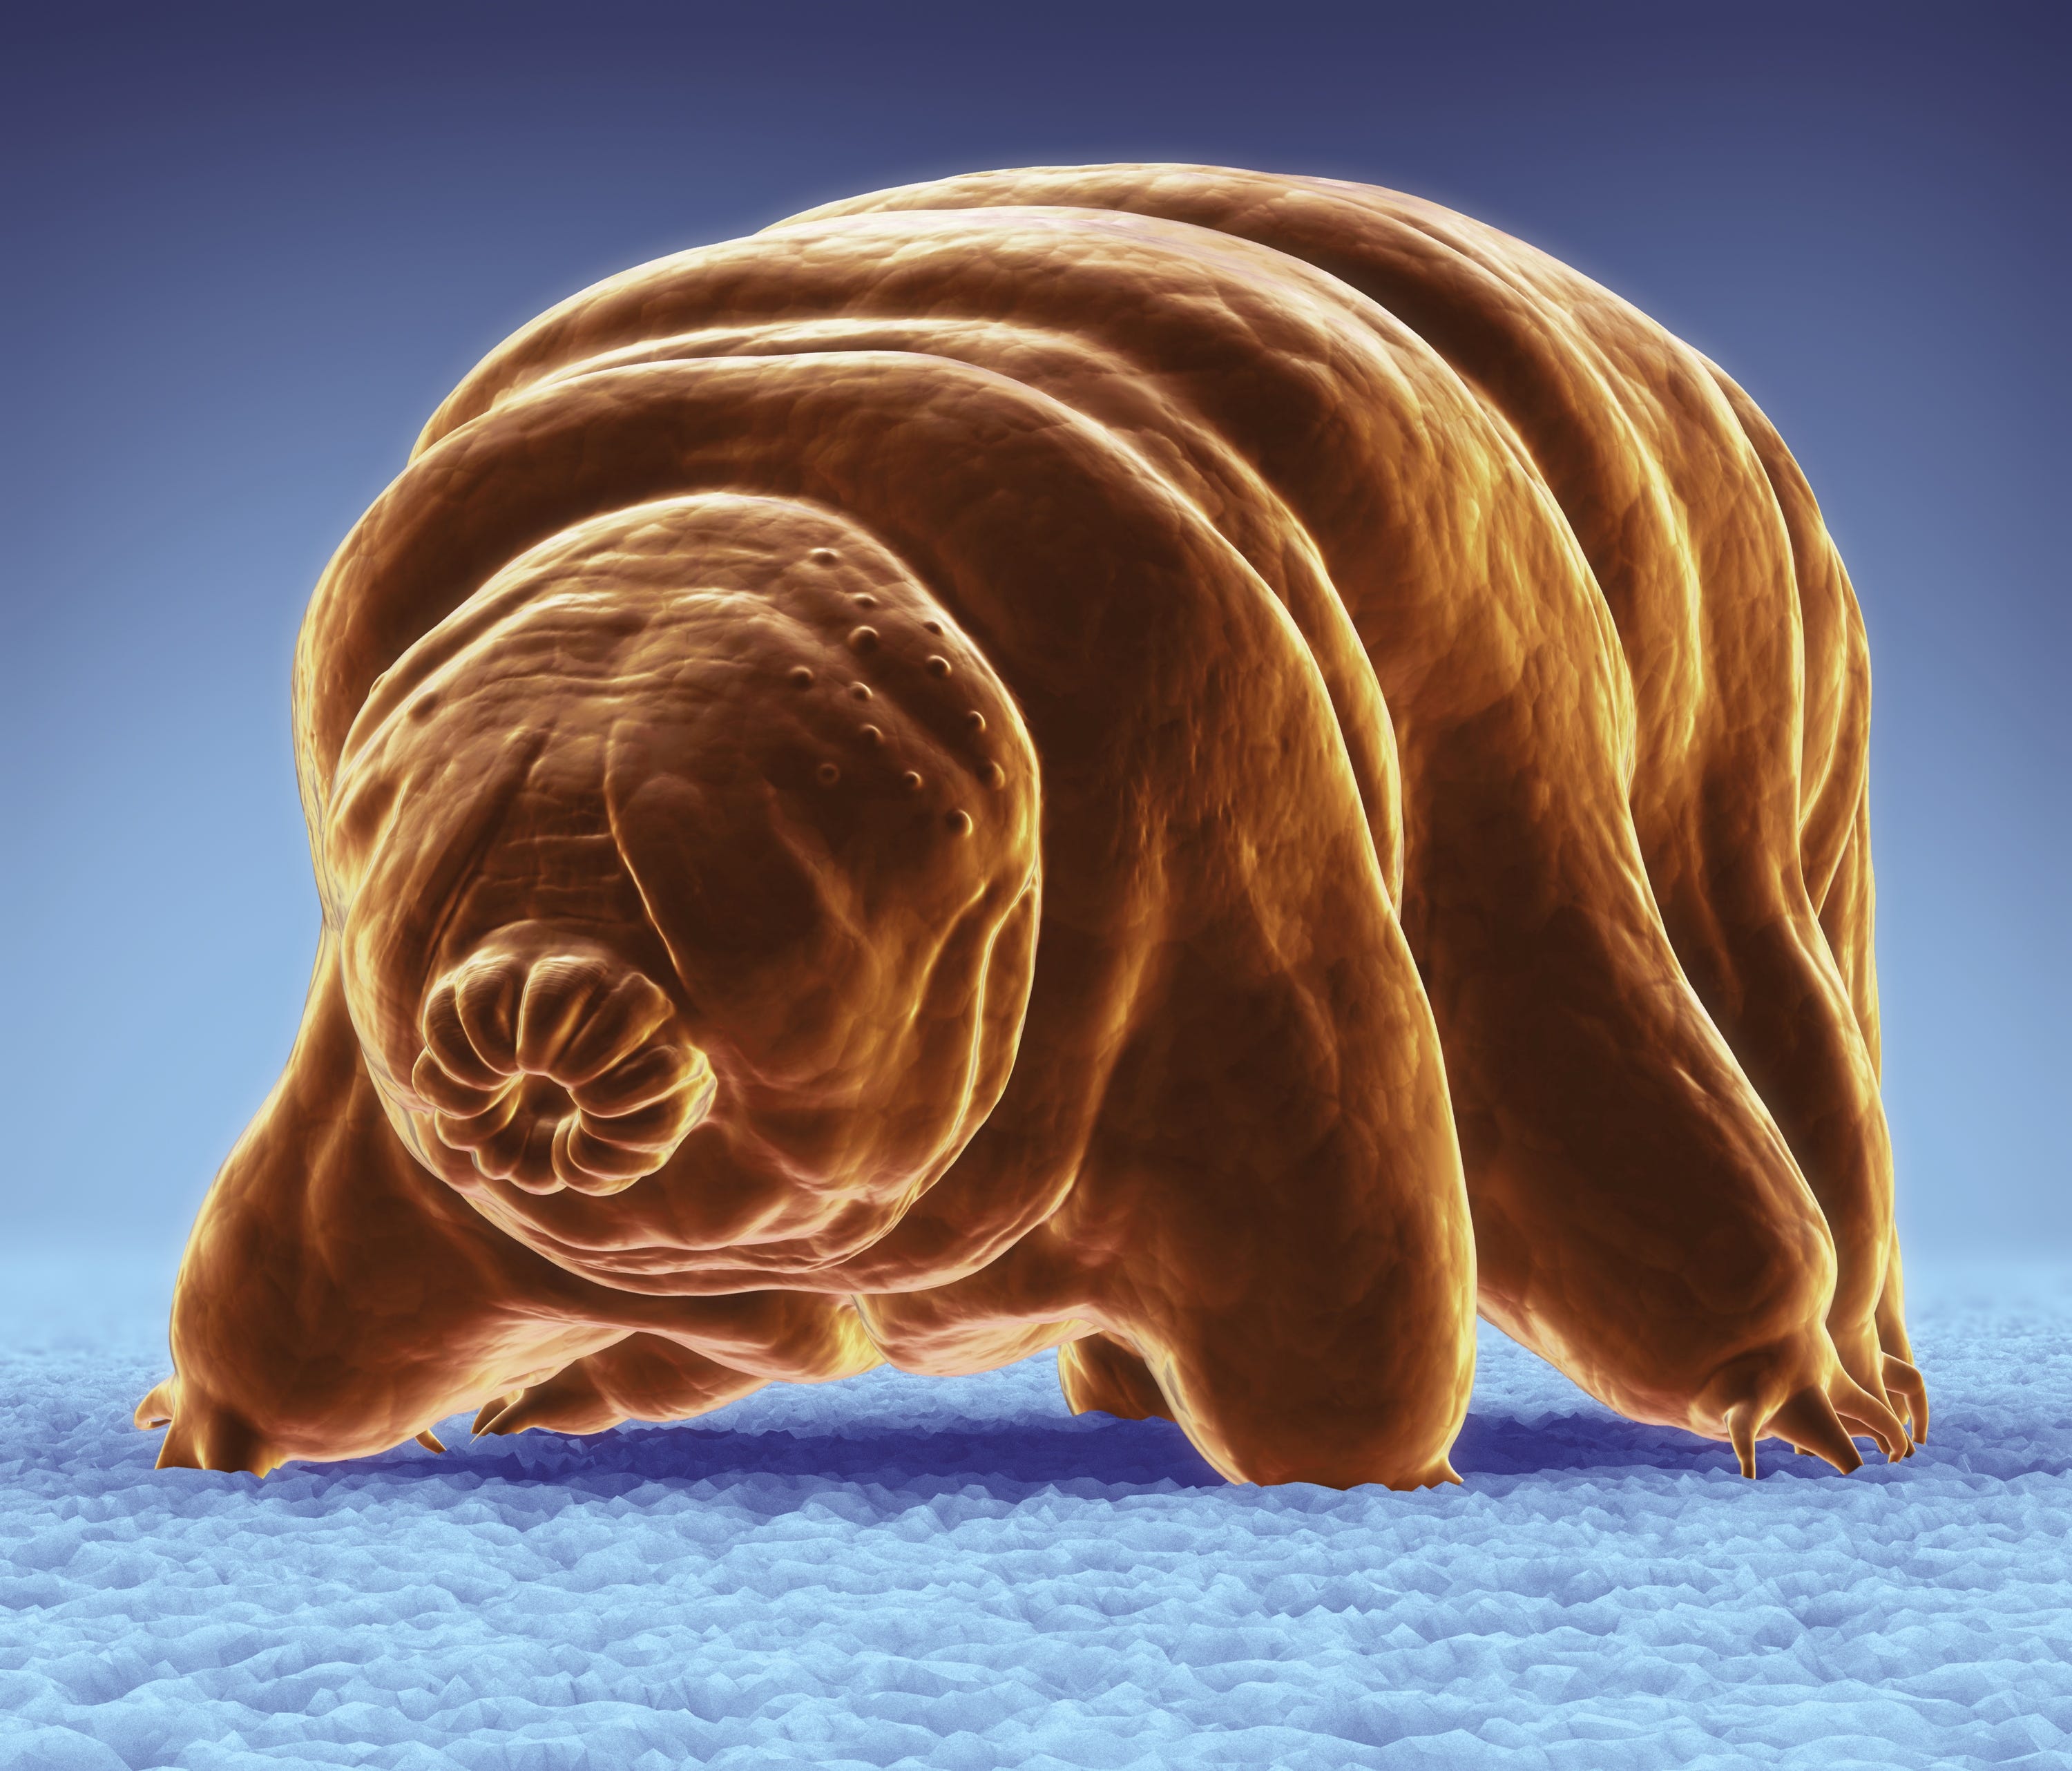 The world's most indestructible species, the tardigrade, an eight-legged micro-animal will survive until the Sun dies, according to a new Oxford University study.